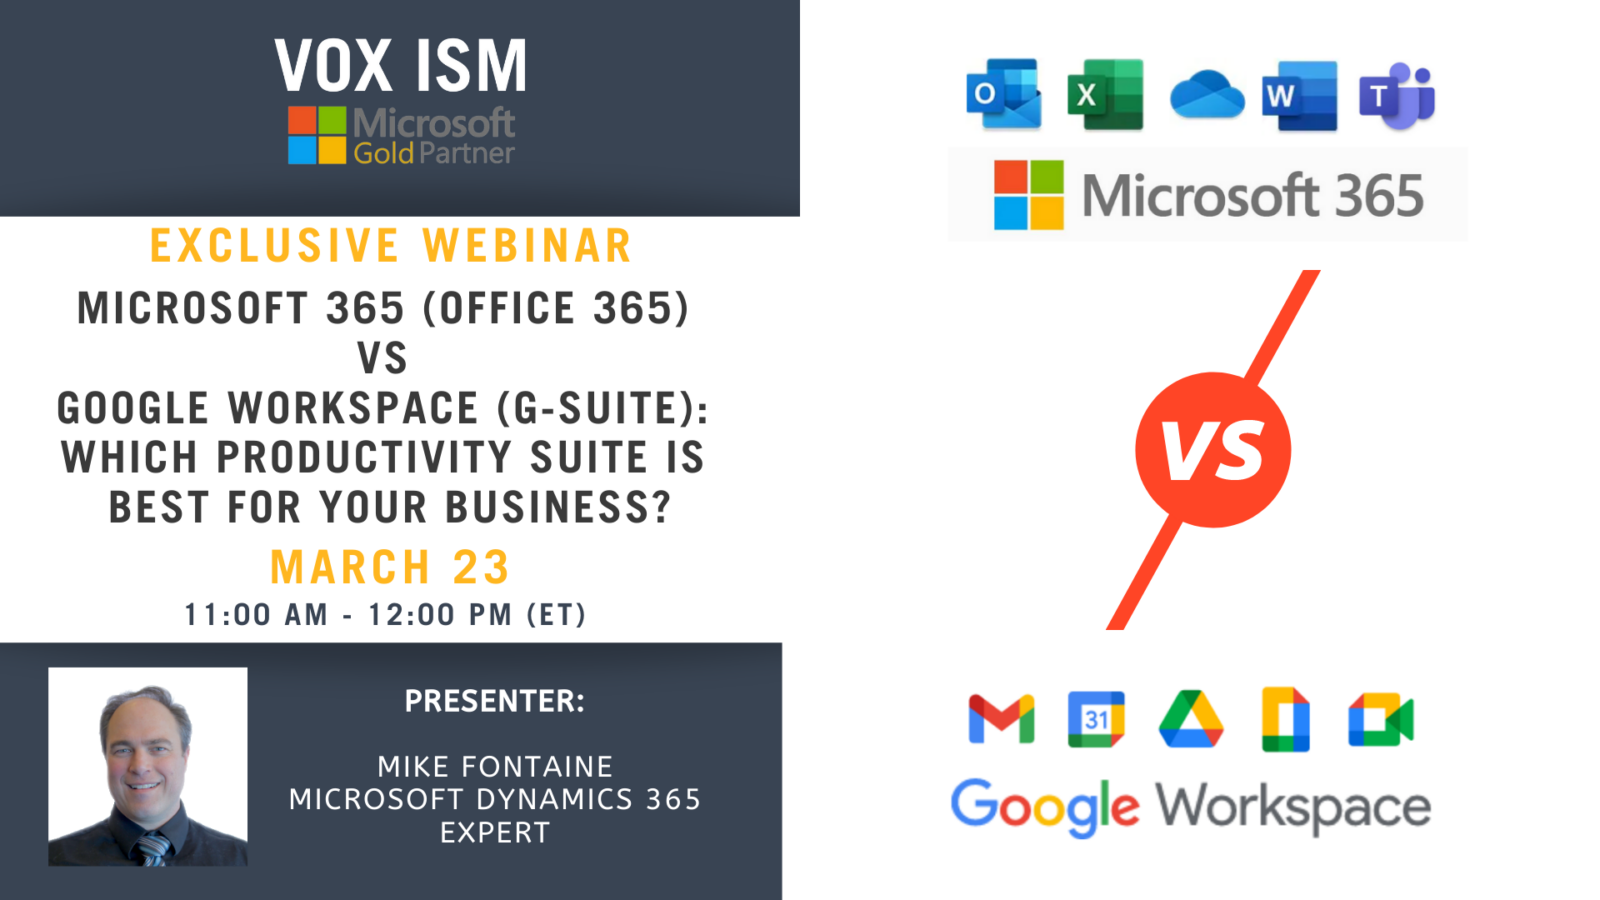 Microsoft 365 (formerly Office 365) vs Google Workspace (formerly G-suite): Which productivity suite is best for your business? - March 23 - Webinar